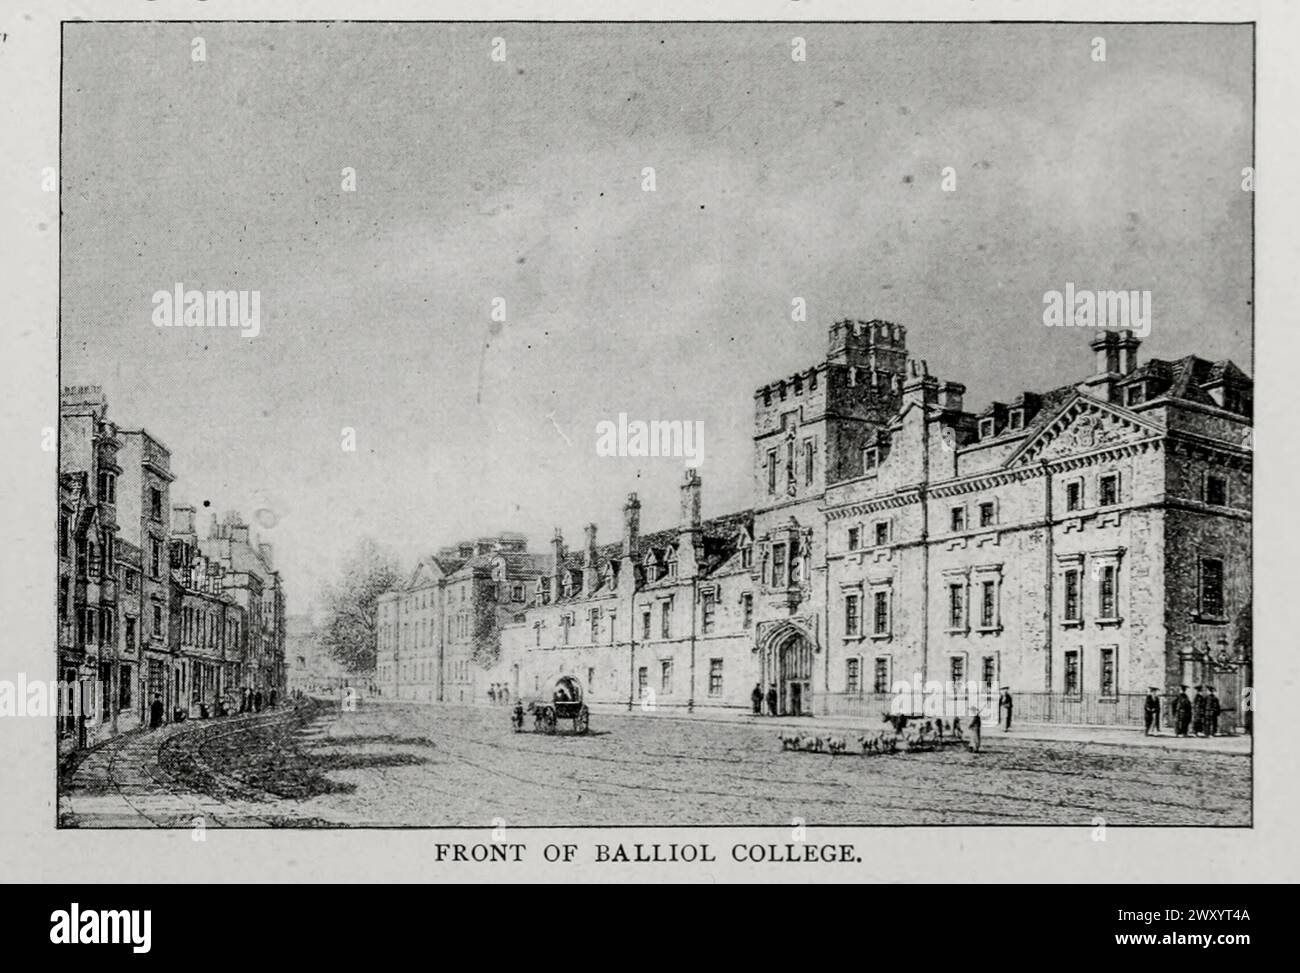 FRONT OF BALLIOL COLLEGE. from the Article THE BUILDINGS OF OXFORD, FROM AN ENGINEER'S POINT OF VIEW. By J. W. Parry.  from The Engineering Magazine Devoted to Industrial Progress Volume XVI October 1898 - March 1899 The Engineering Magazine Co Stock Photo